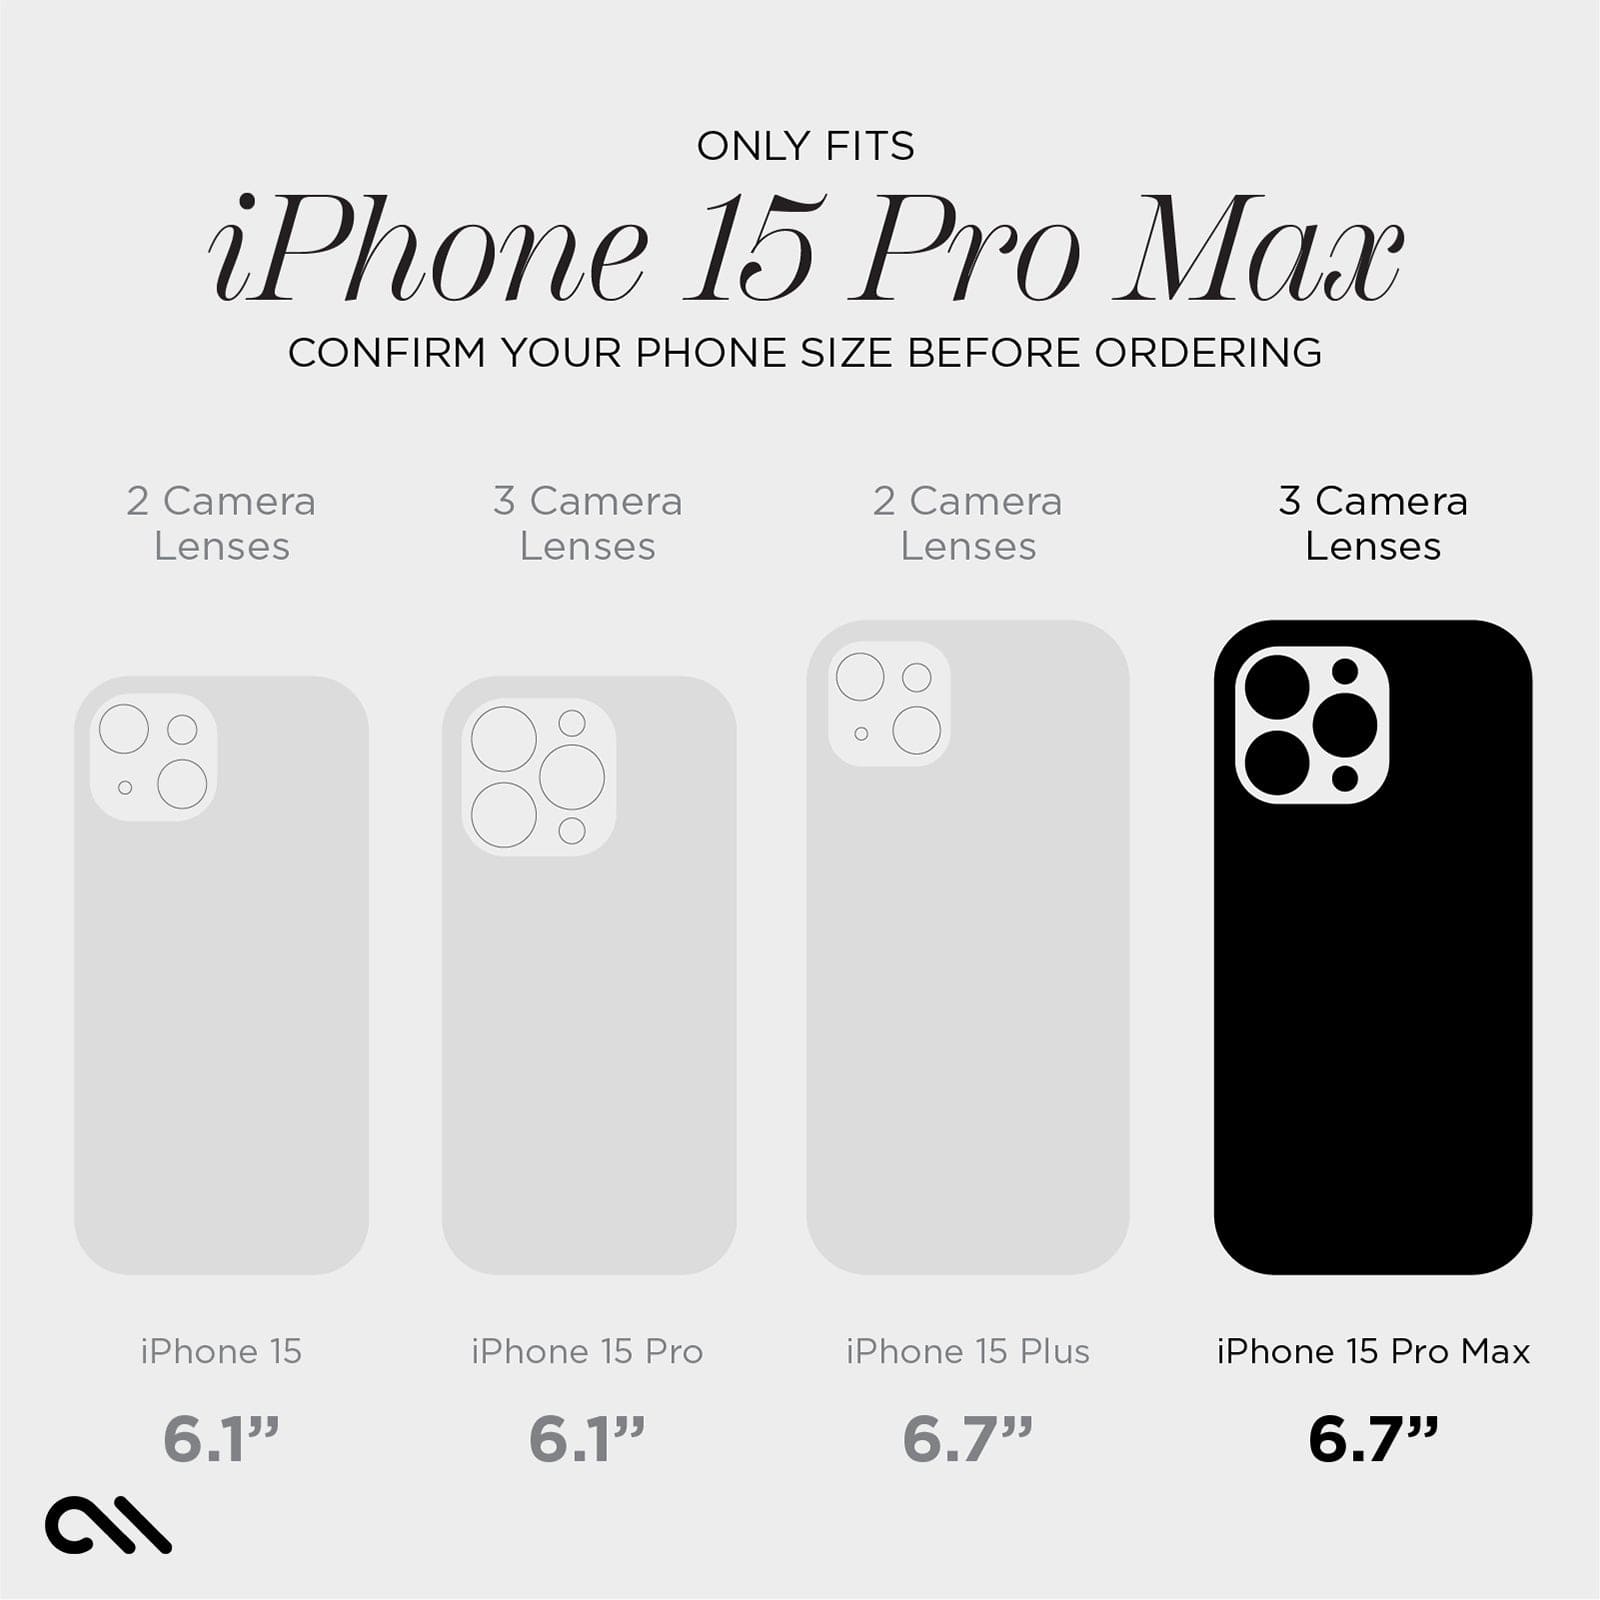 ONLY FITS IPONE 15 PRO MAX. CONFIRM YOUR PHONE SIZE BEFORE ORDERING